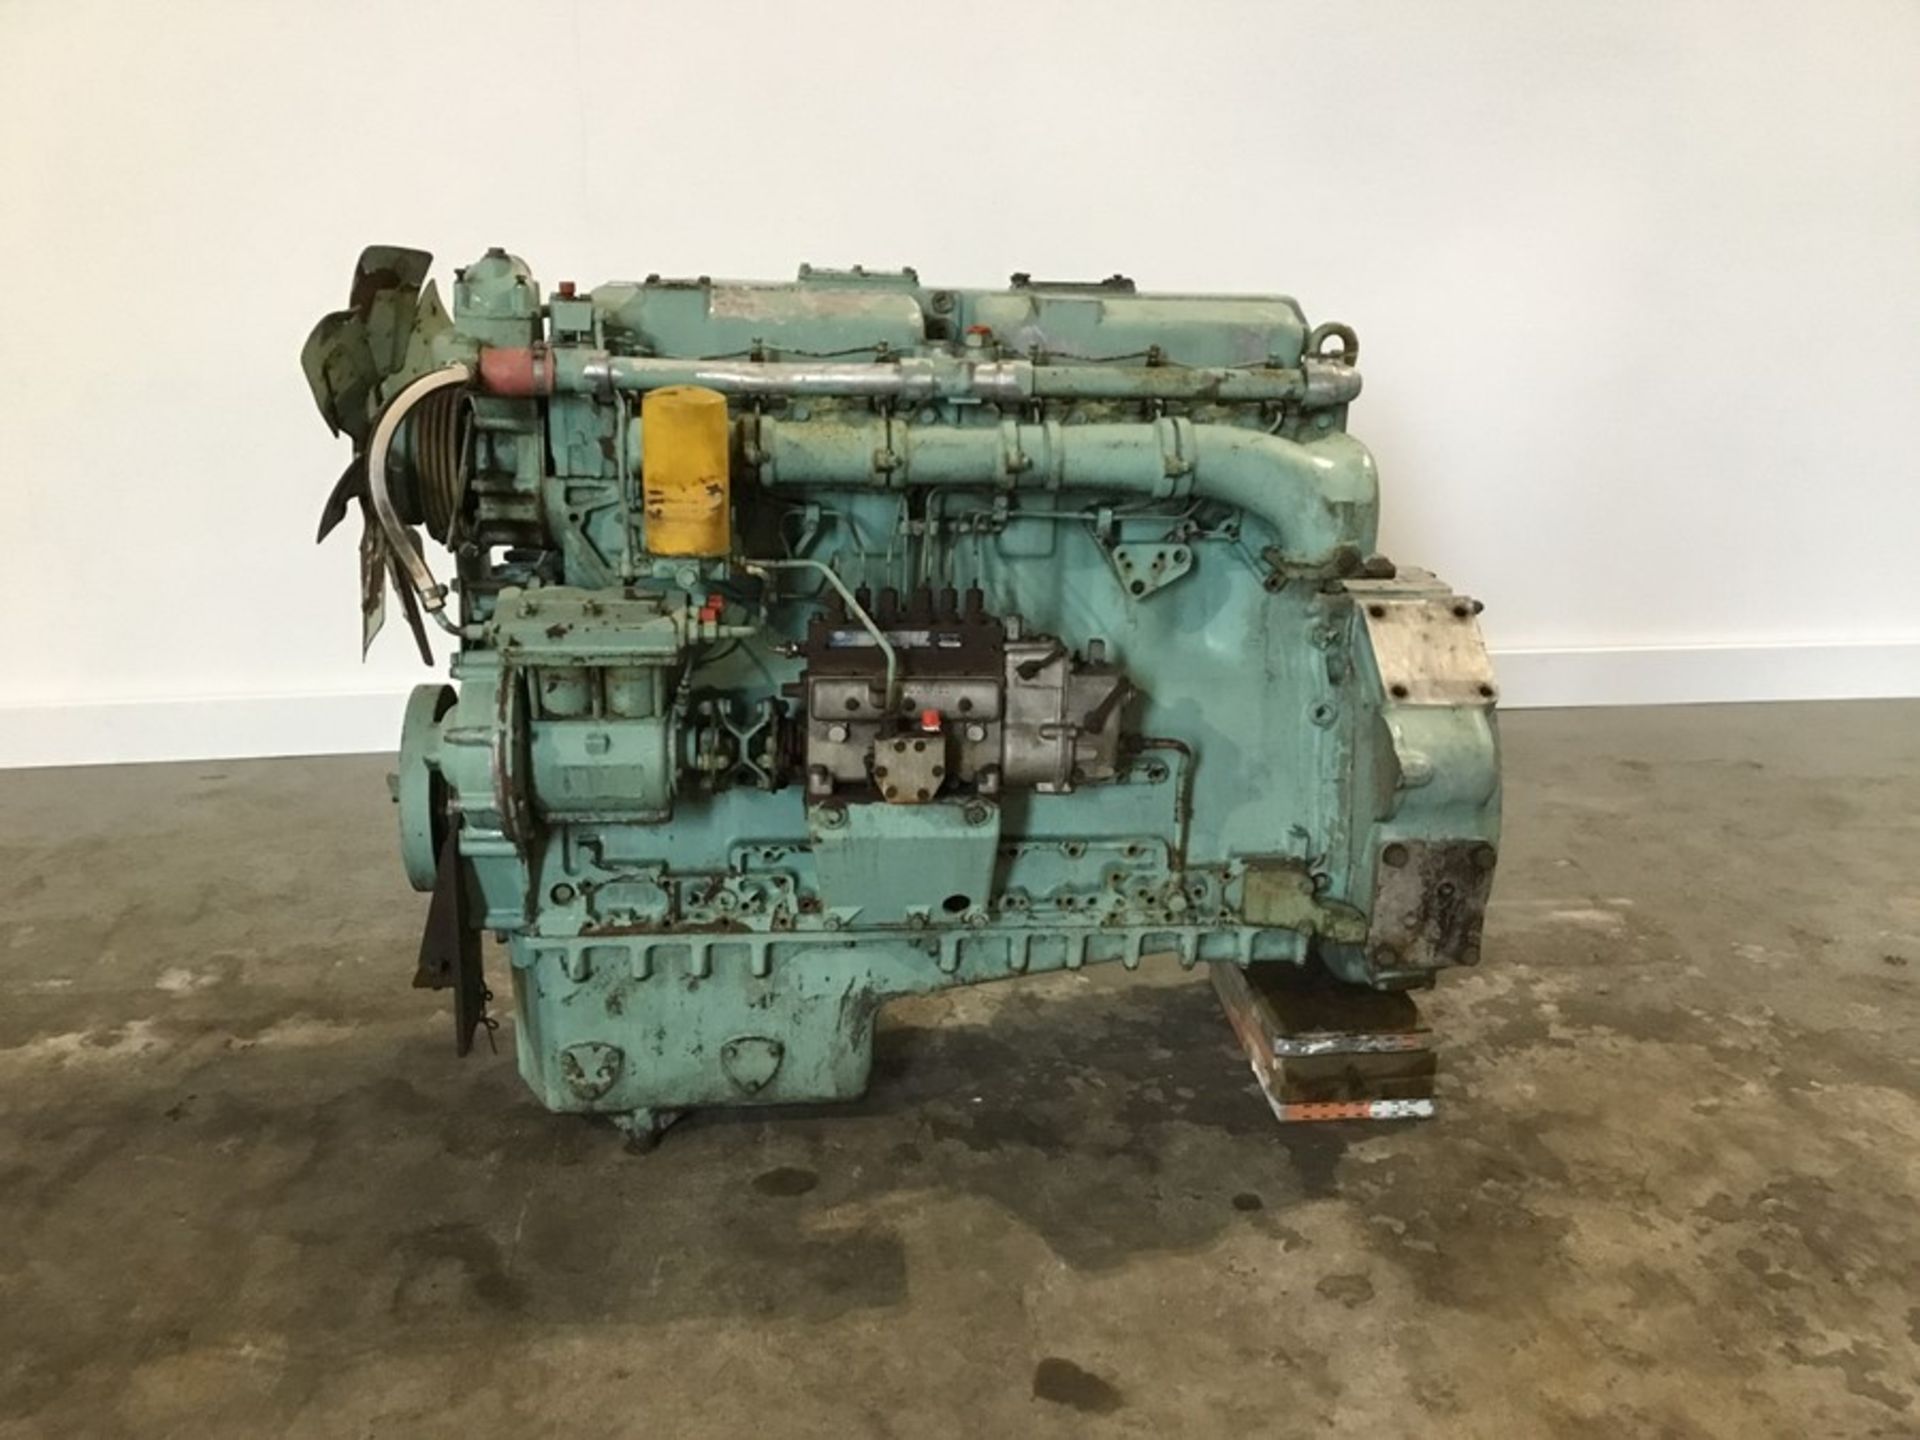 Rolls Royce E220 Diesel engine: Rolls Royce E220 6cyl serial number 628223D-1454/48614 Build - Image 13 of 18